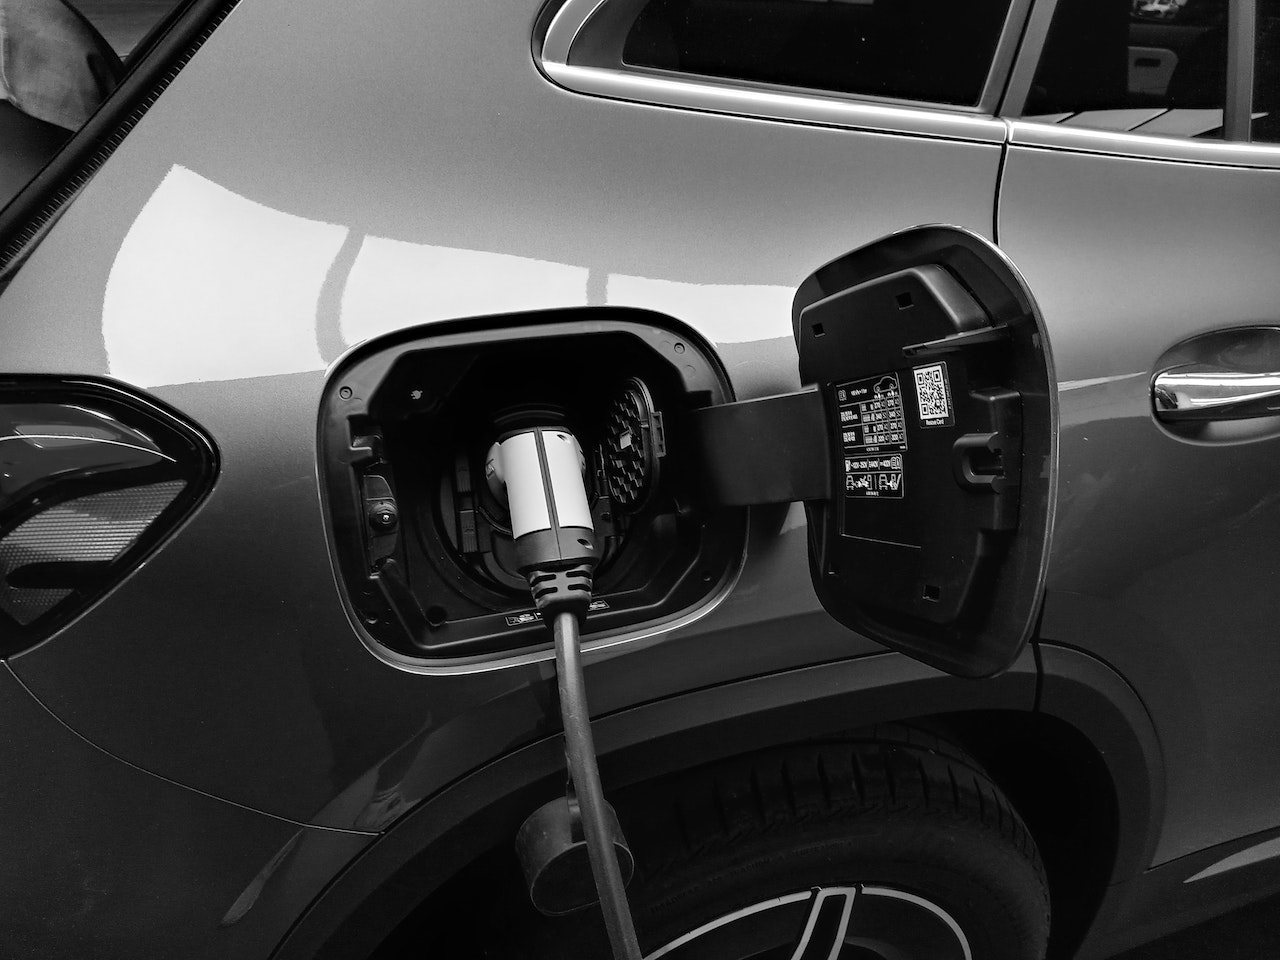 A grey electric car charging zoomed in on the charging port of the vehicle